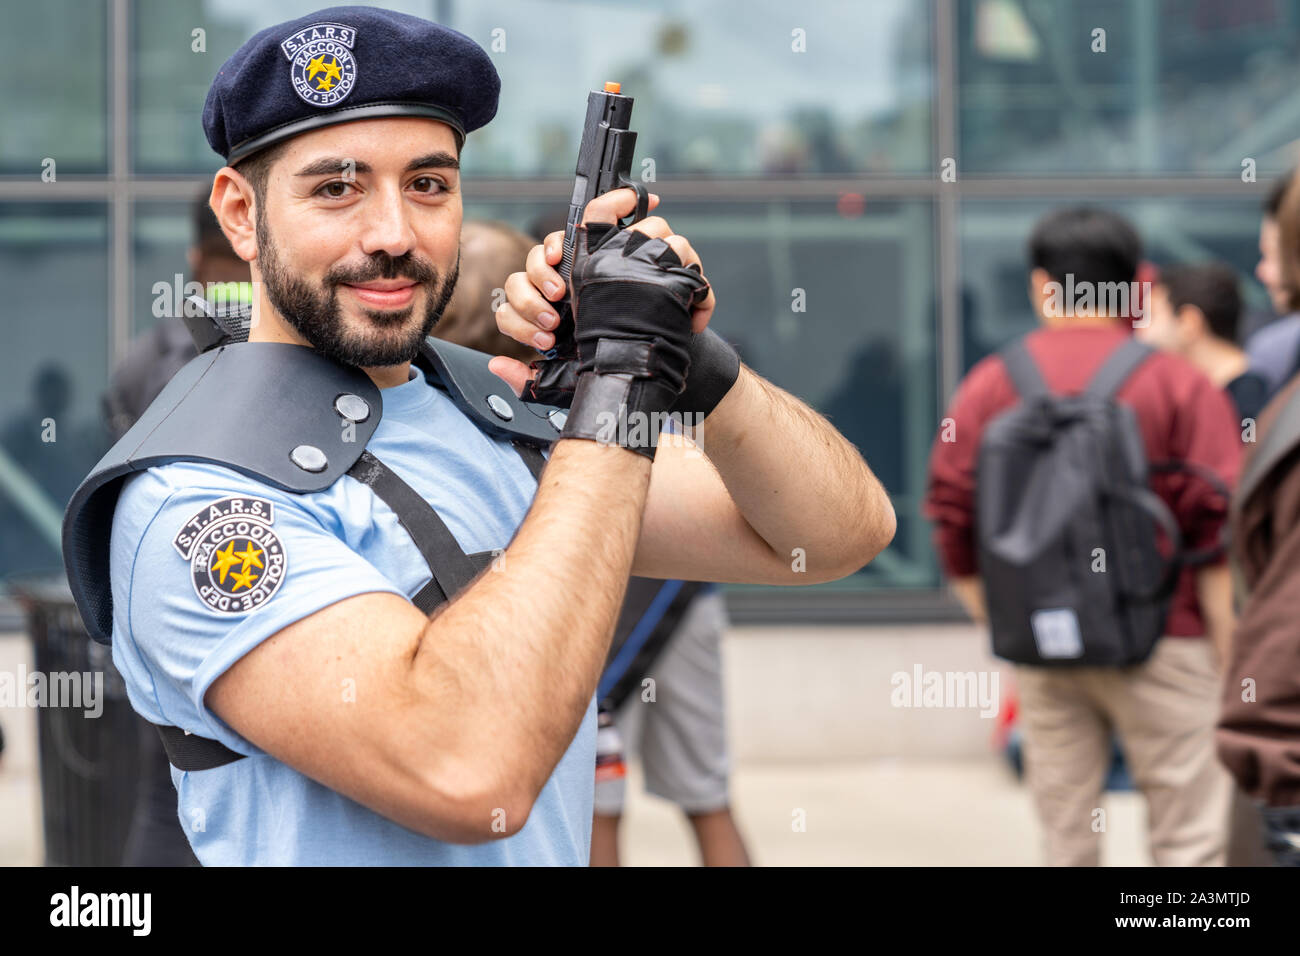 New York, New York - October 6, 2019: Cosplayer dressed as a Resident Evil Racoon City Police Officer during New York Comic Con. Stock Photo